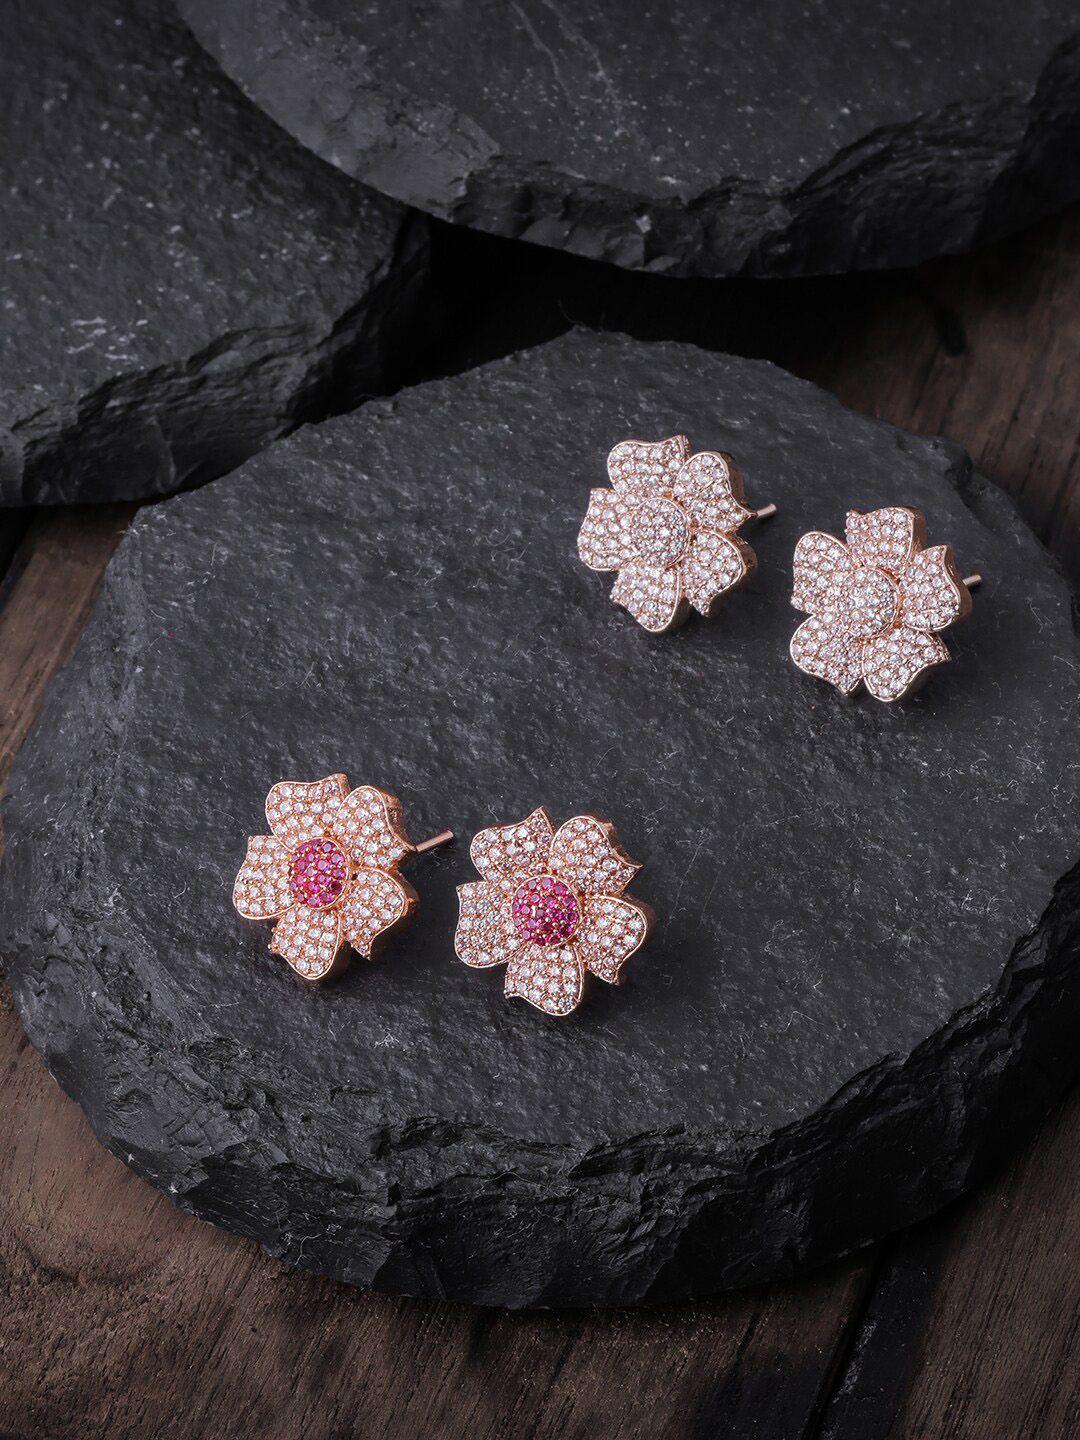 brandsoon pack of 2 white & pink rose gold-plated ad-studded floral studs earrings